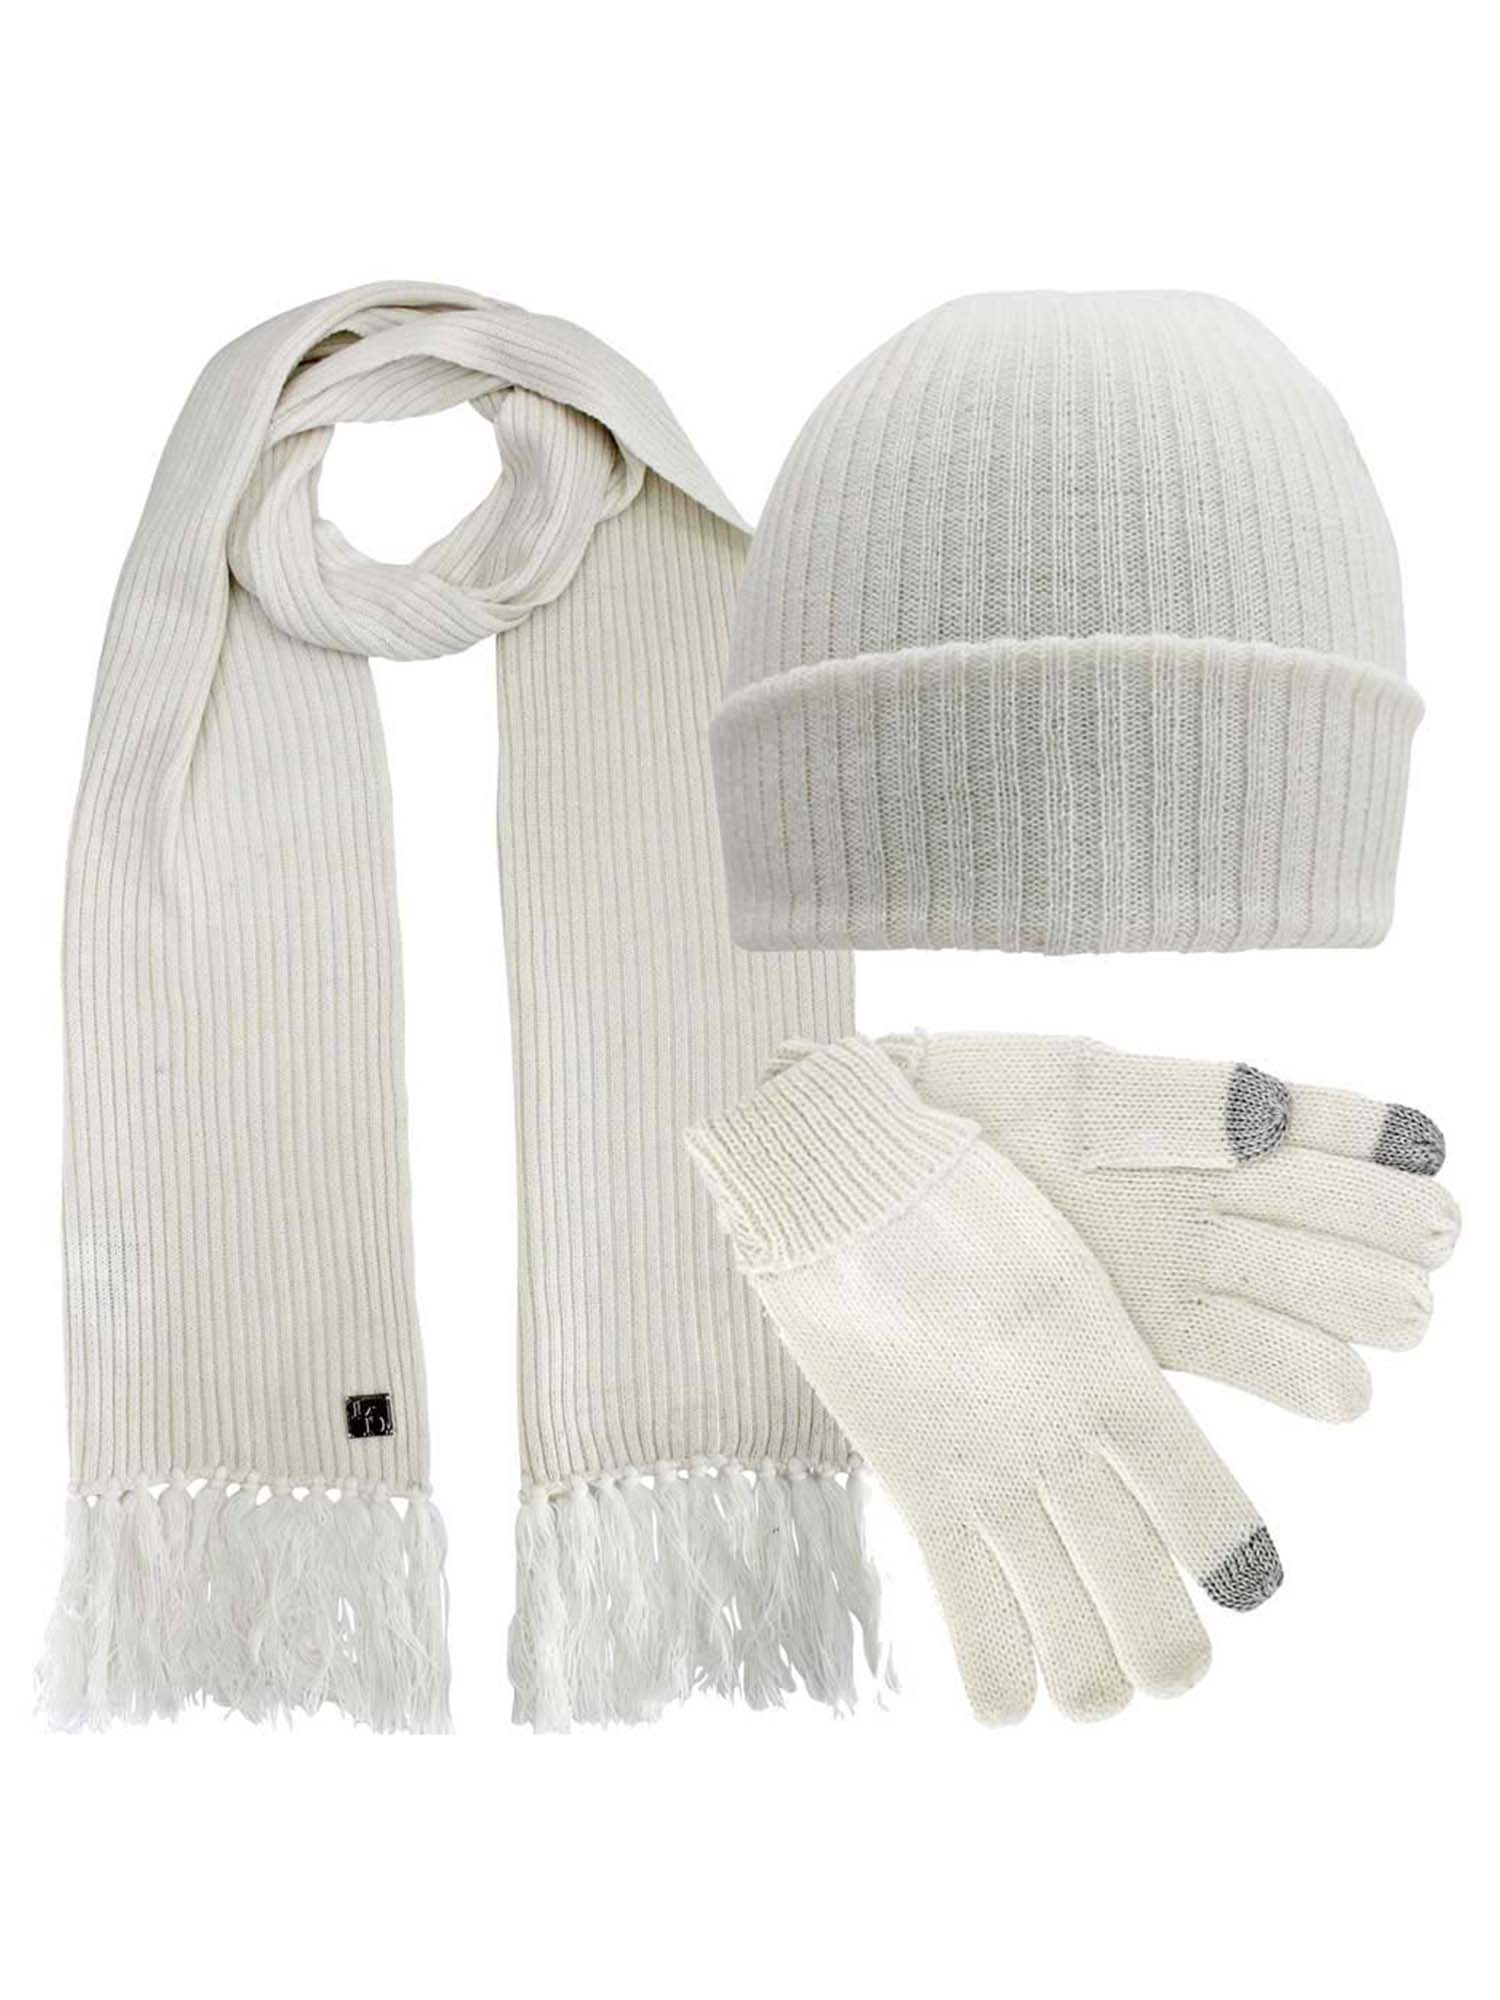 Hats and Gloves - Men's Luxury Collection